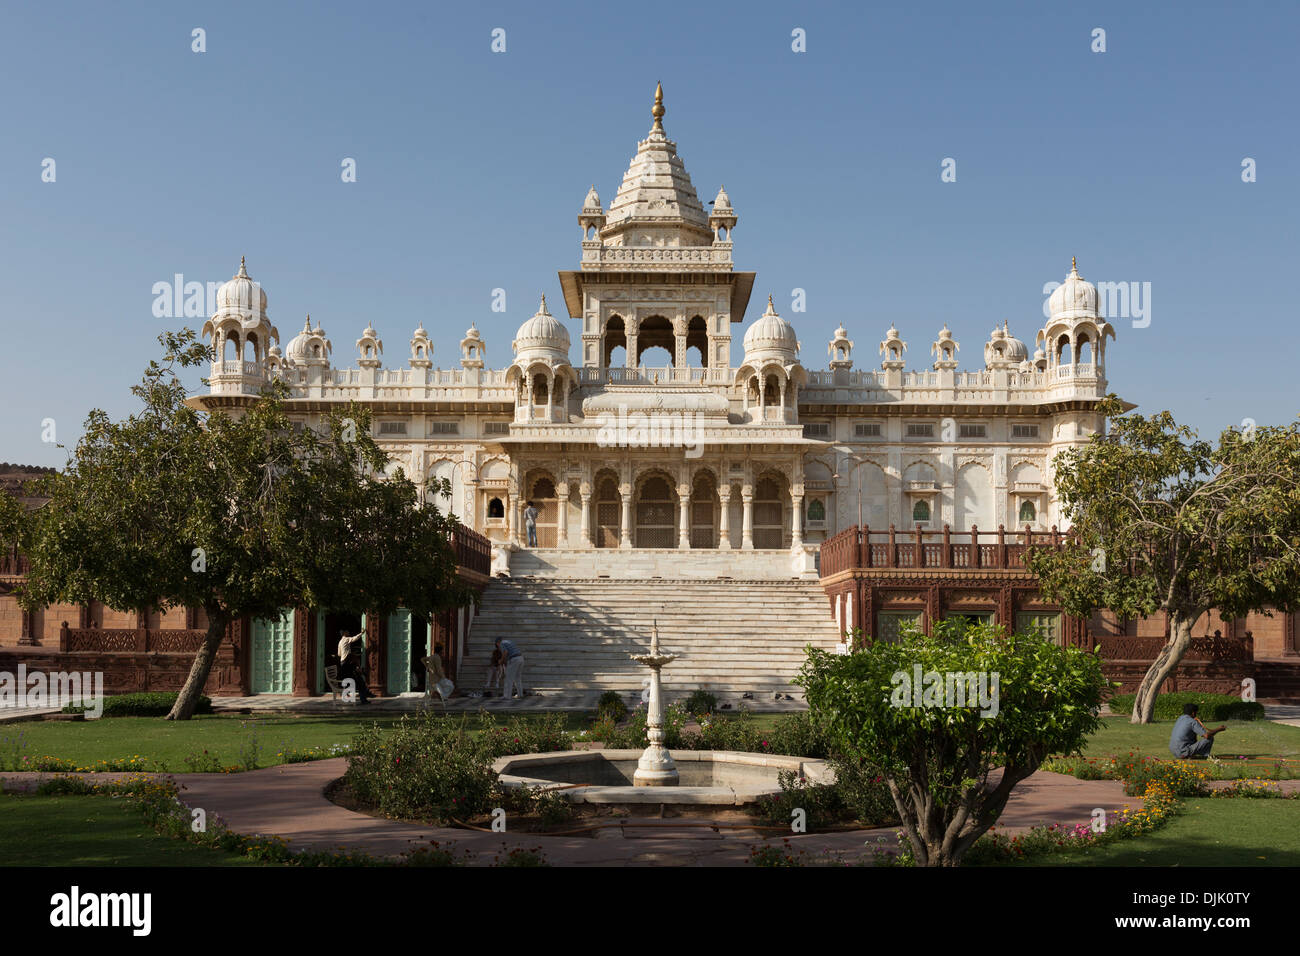 Facade of white marble of the magnificent temple Jaswant Thada . This temple is known as the 'little Taj'. Stock Photo